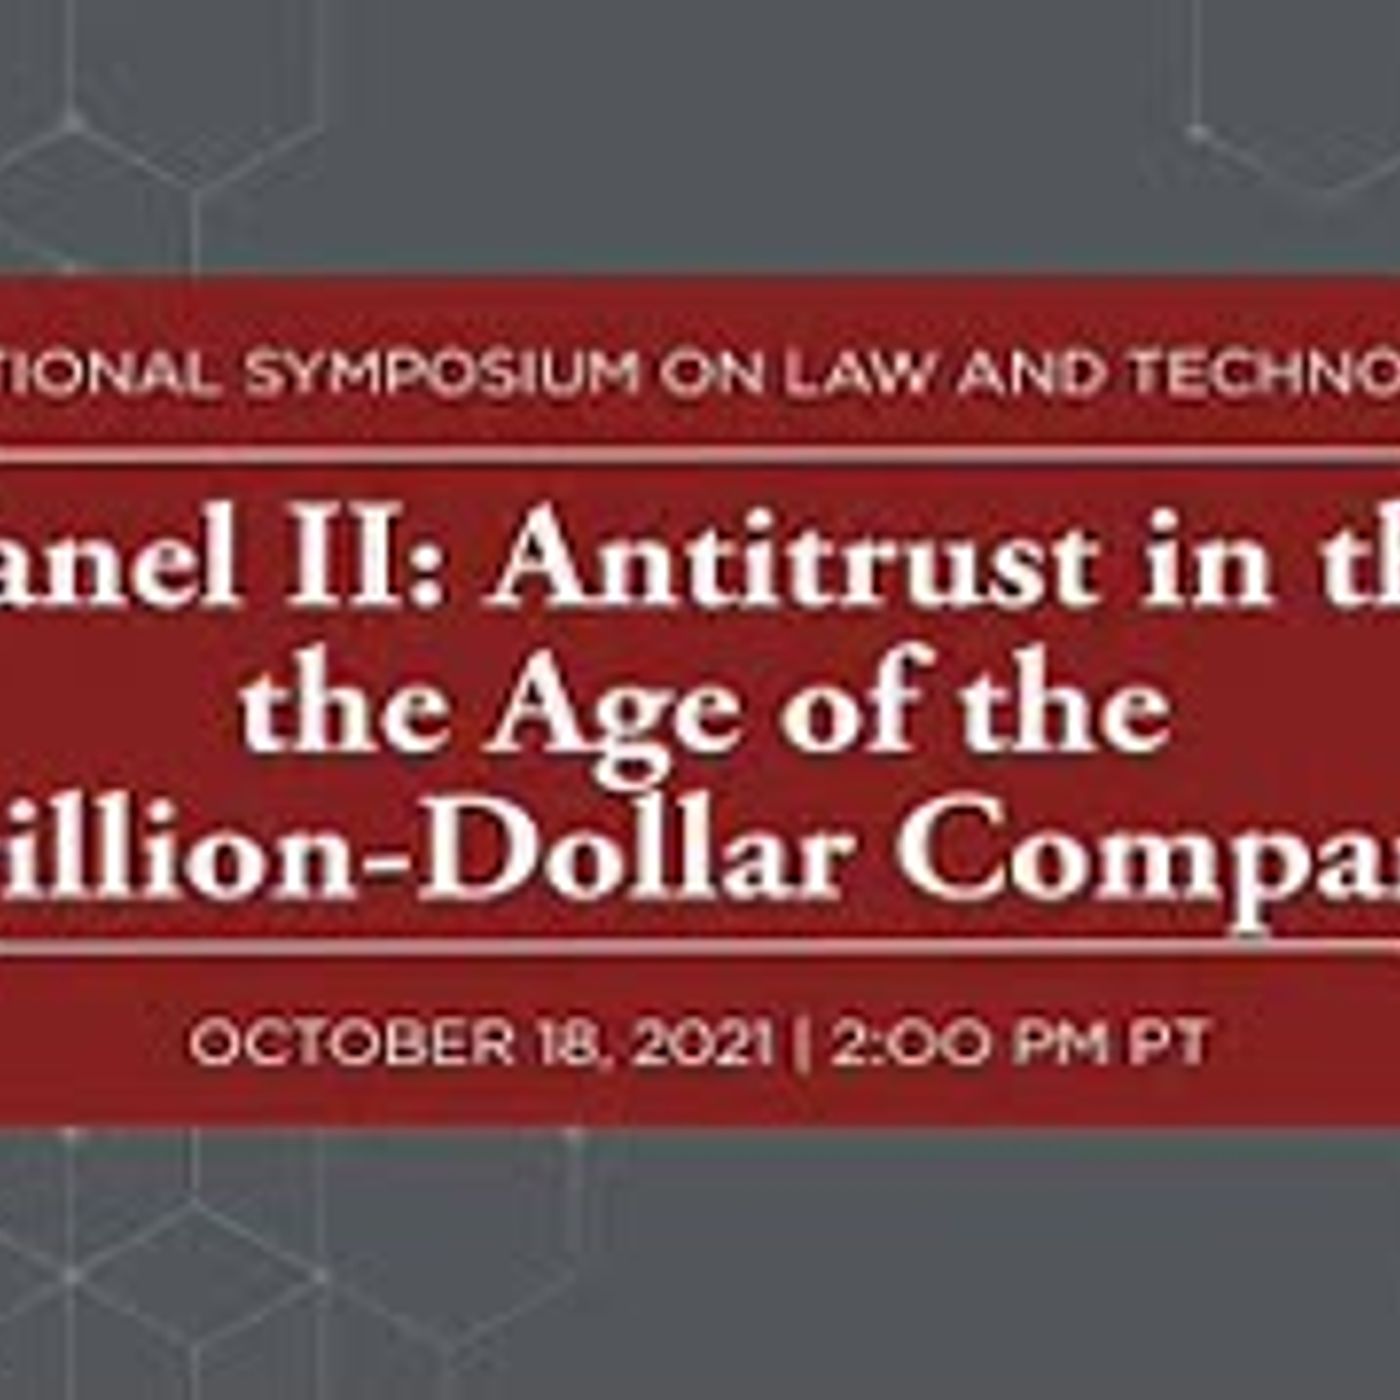 Panel II: Antitrust in the the Age of the Trillion-Dollar Company